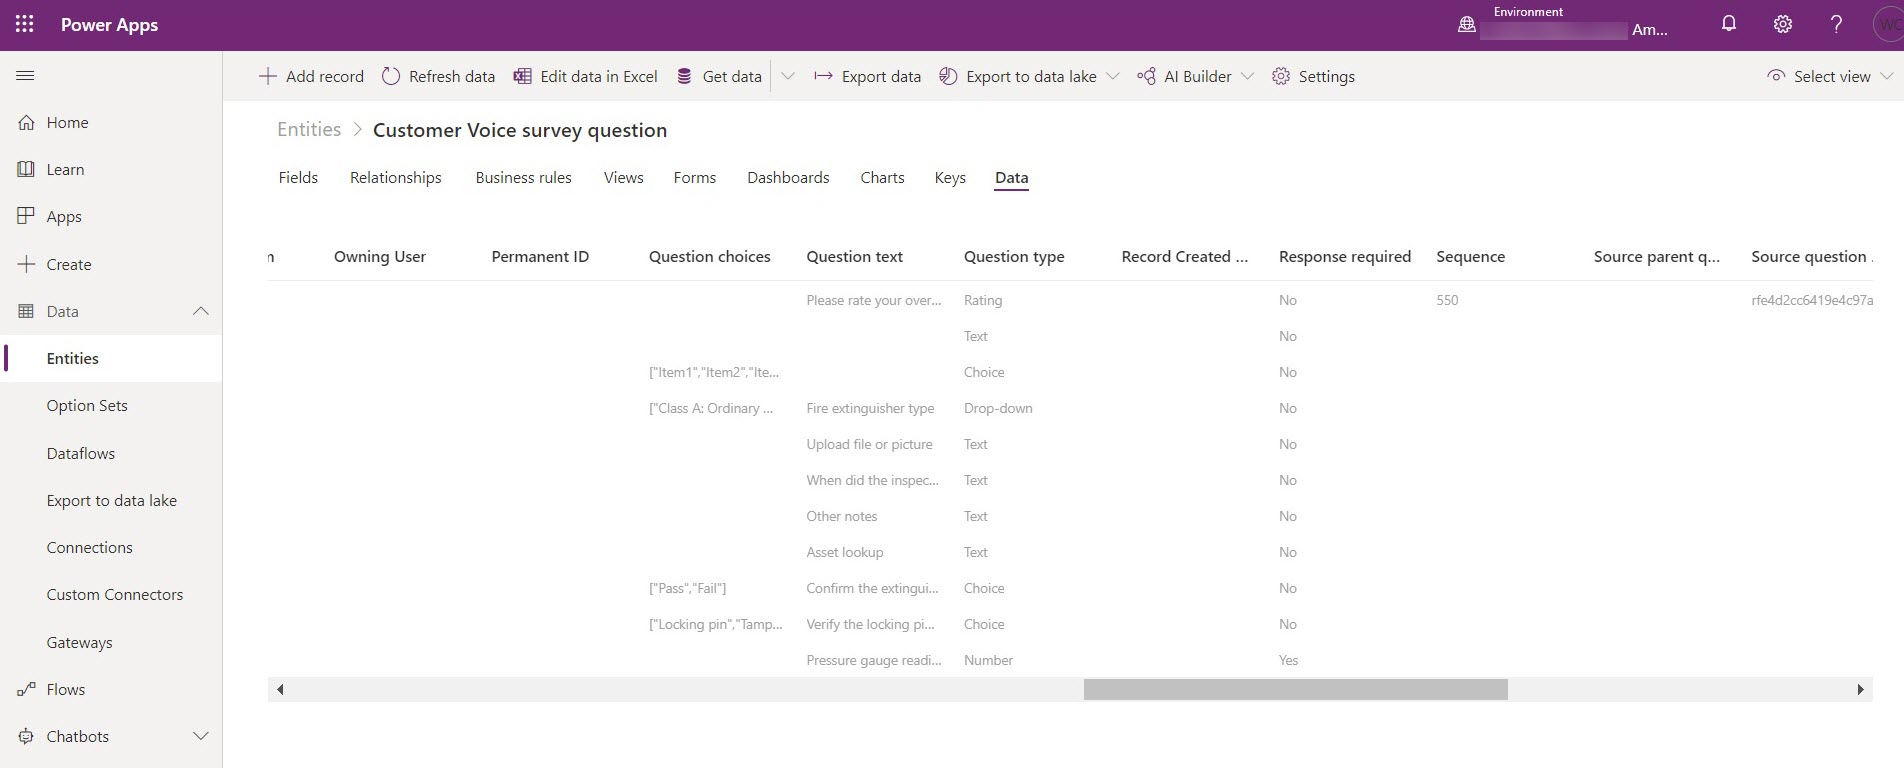 Power Apps, showing the Customer Voice survey question entity detail page.